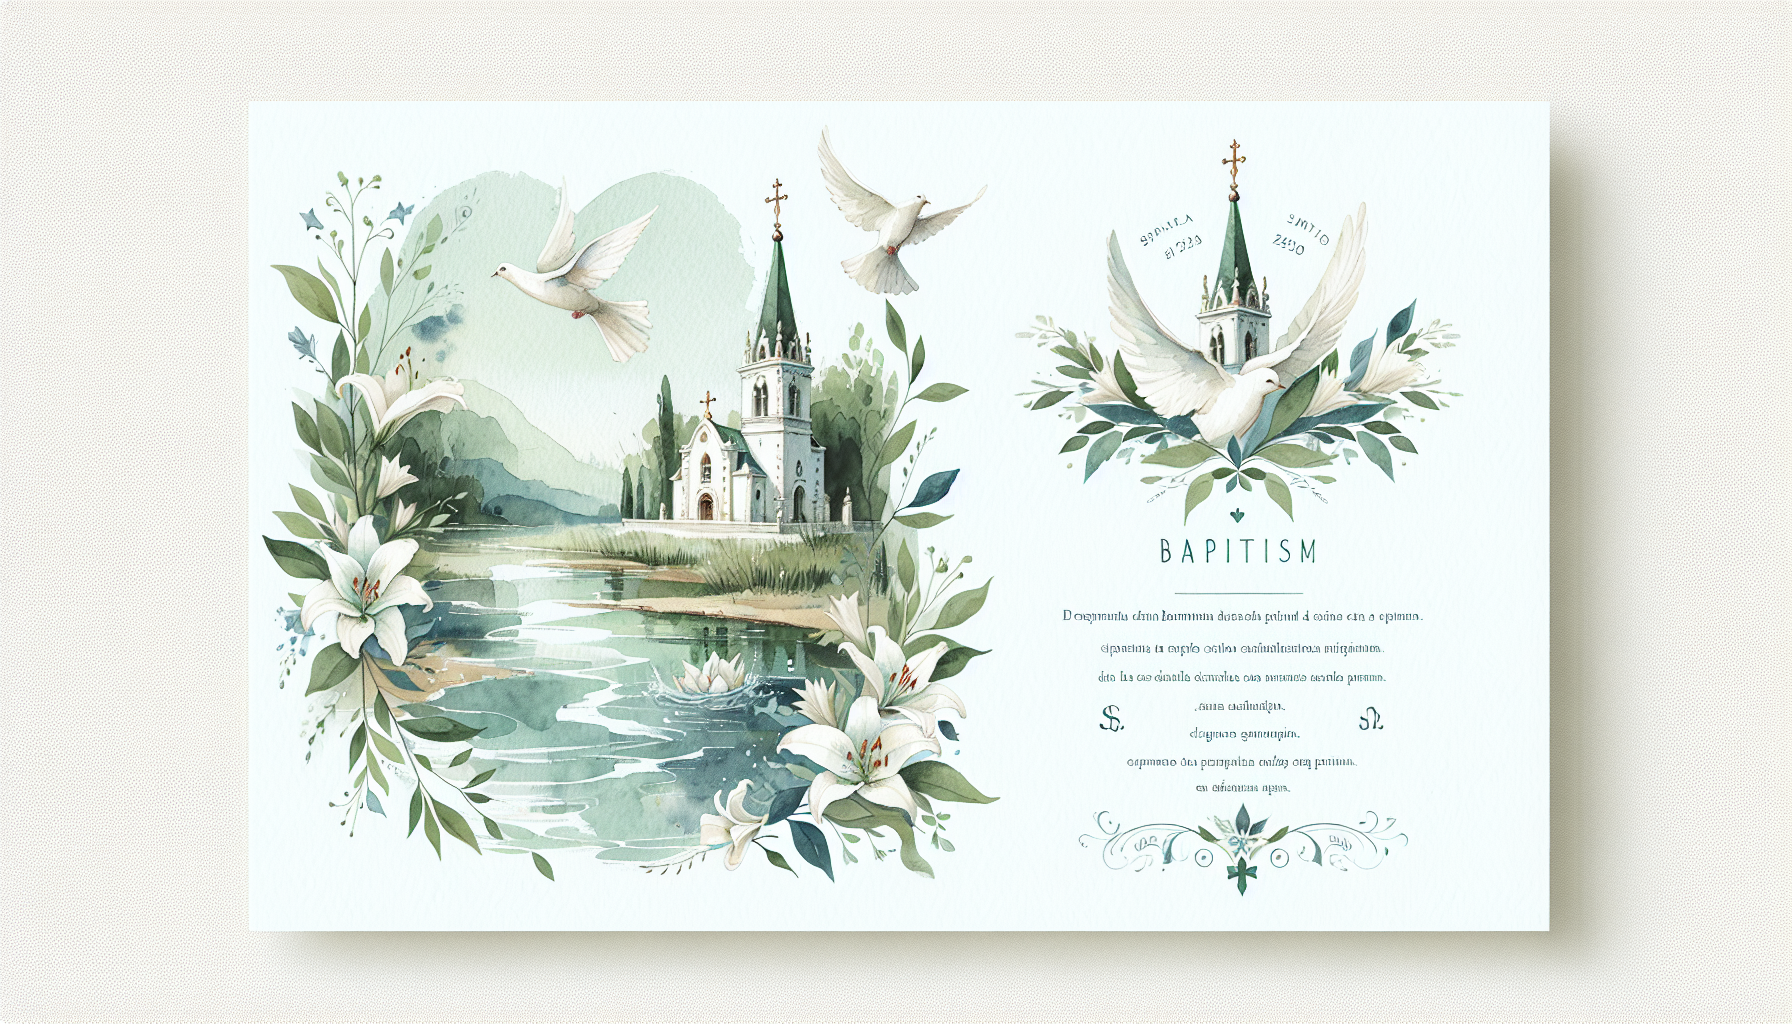 An artistically designed baptism card with delicate watercolor illustrations, featuring gentle tones of blue and green, showcasing a peaceful scene with a traditional church, a flowing river symbolizi